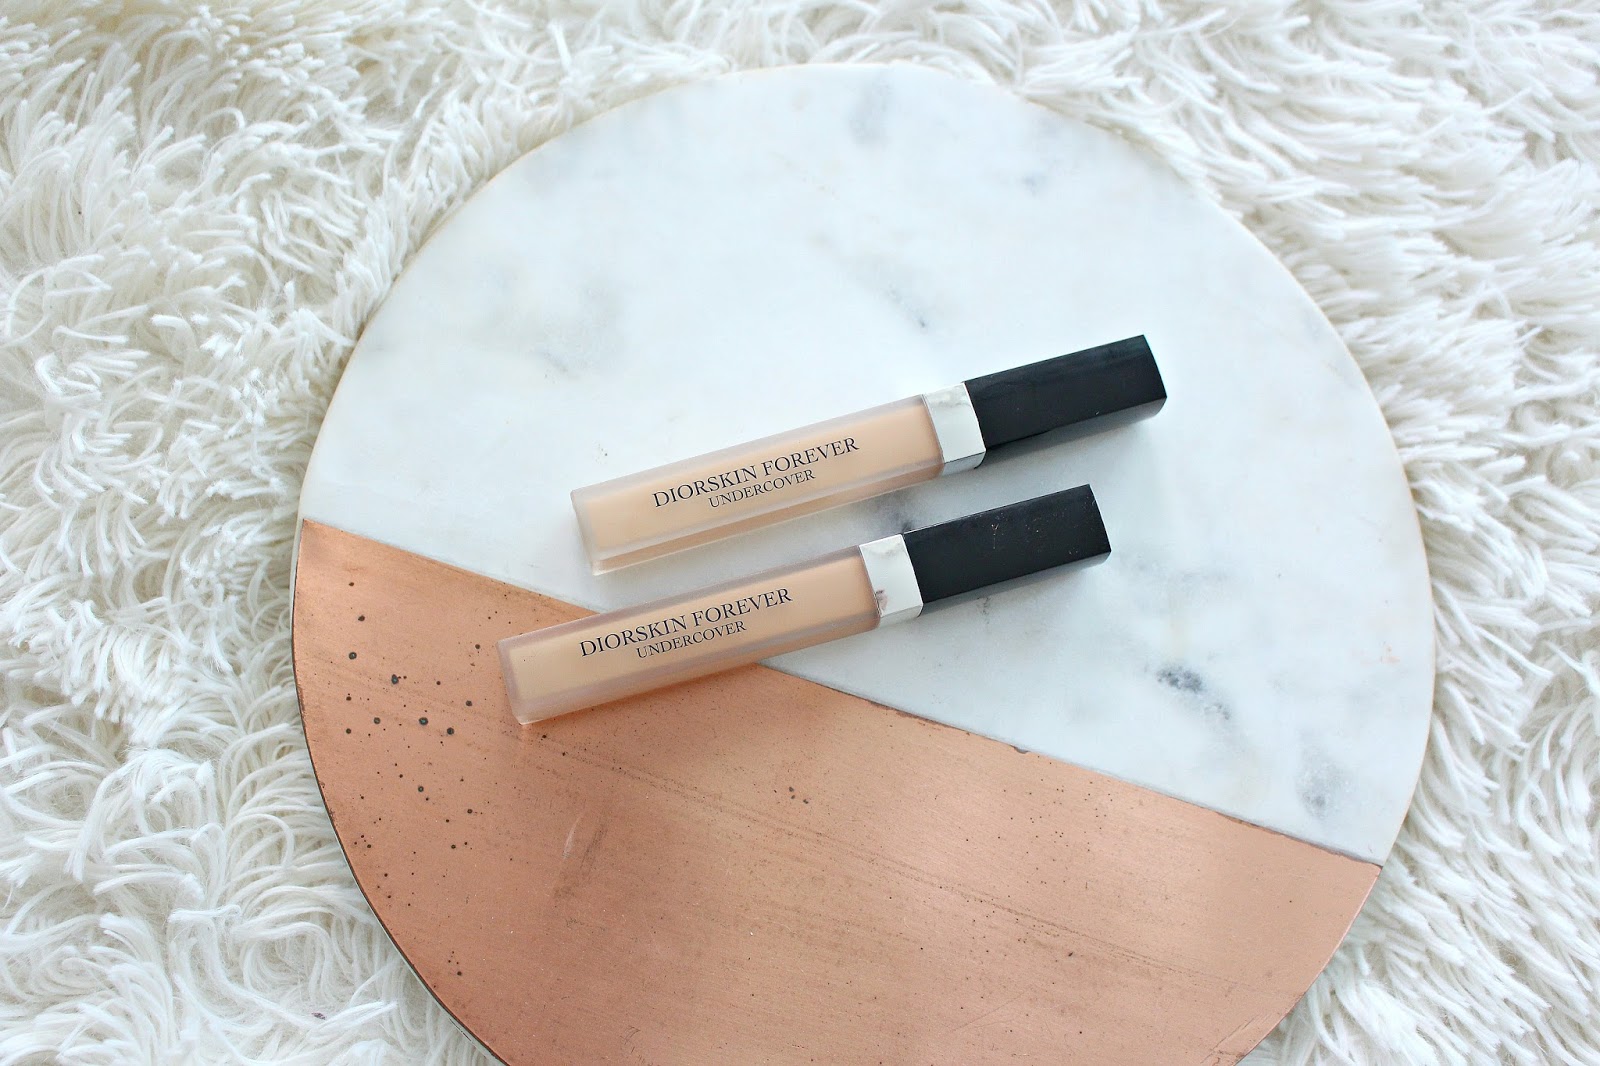 dior forever undercover concealer review